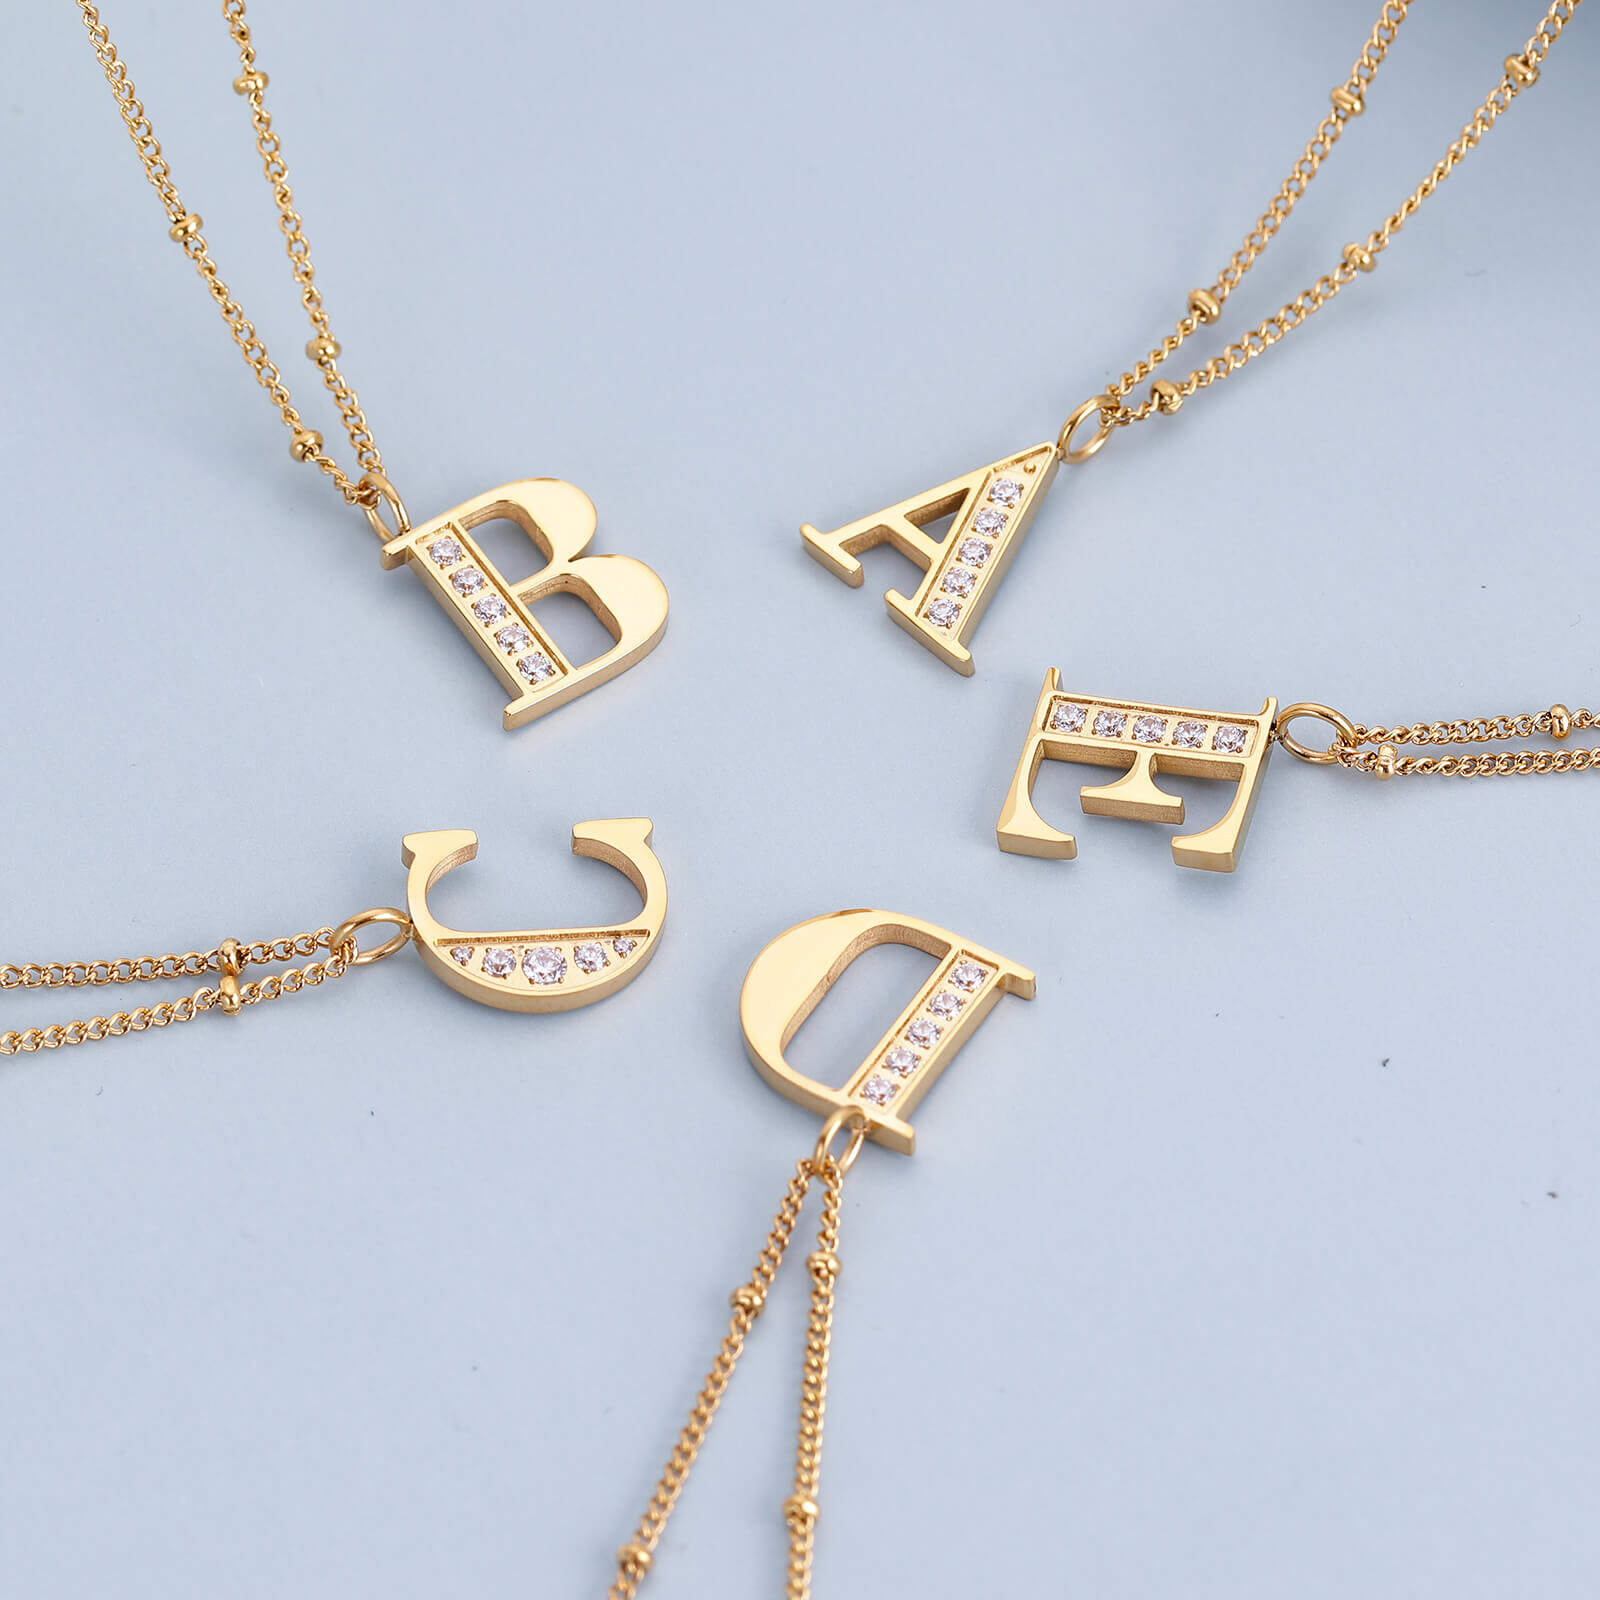 letter necklace c,small letter initial necklace,gothic letter initial necklace,4 letter initial necklace,letter initial necklace gold